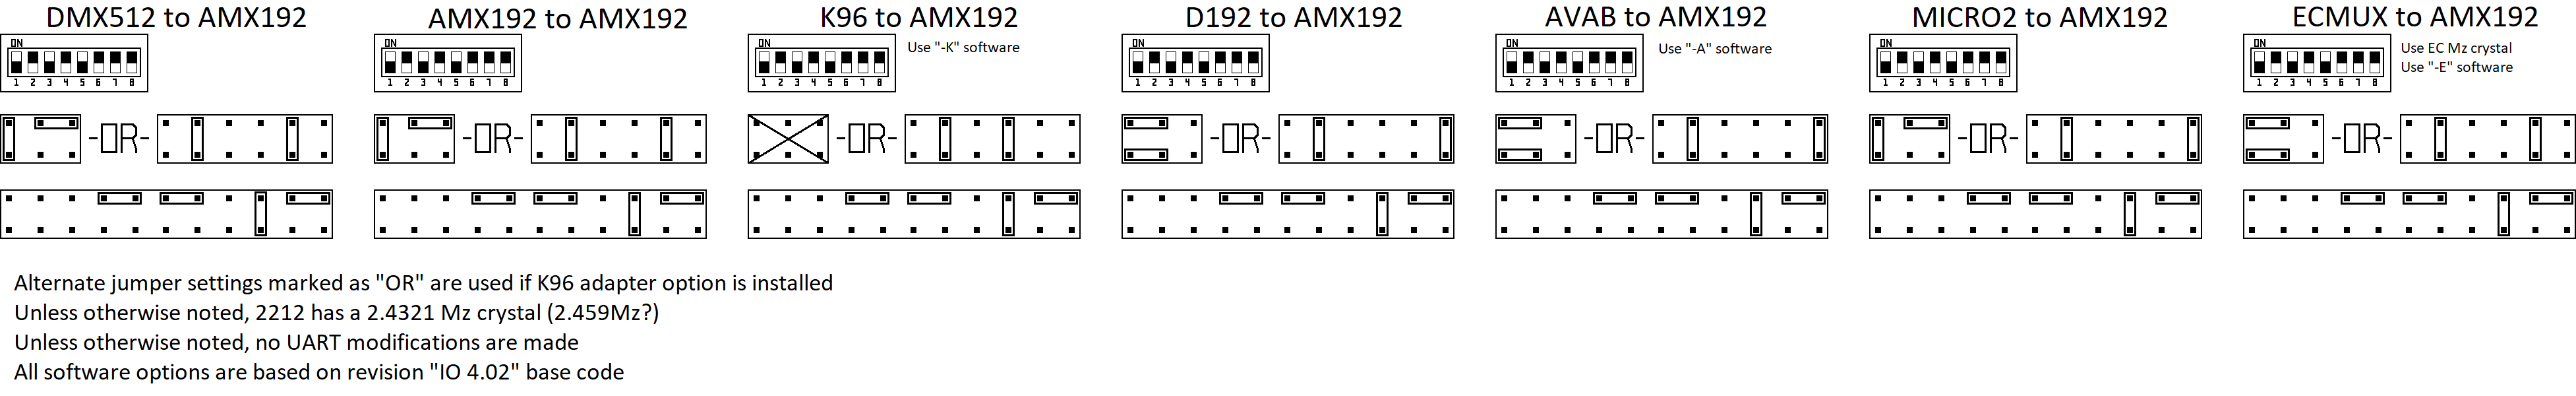 RD2031 Input to AMX192.png